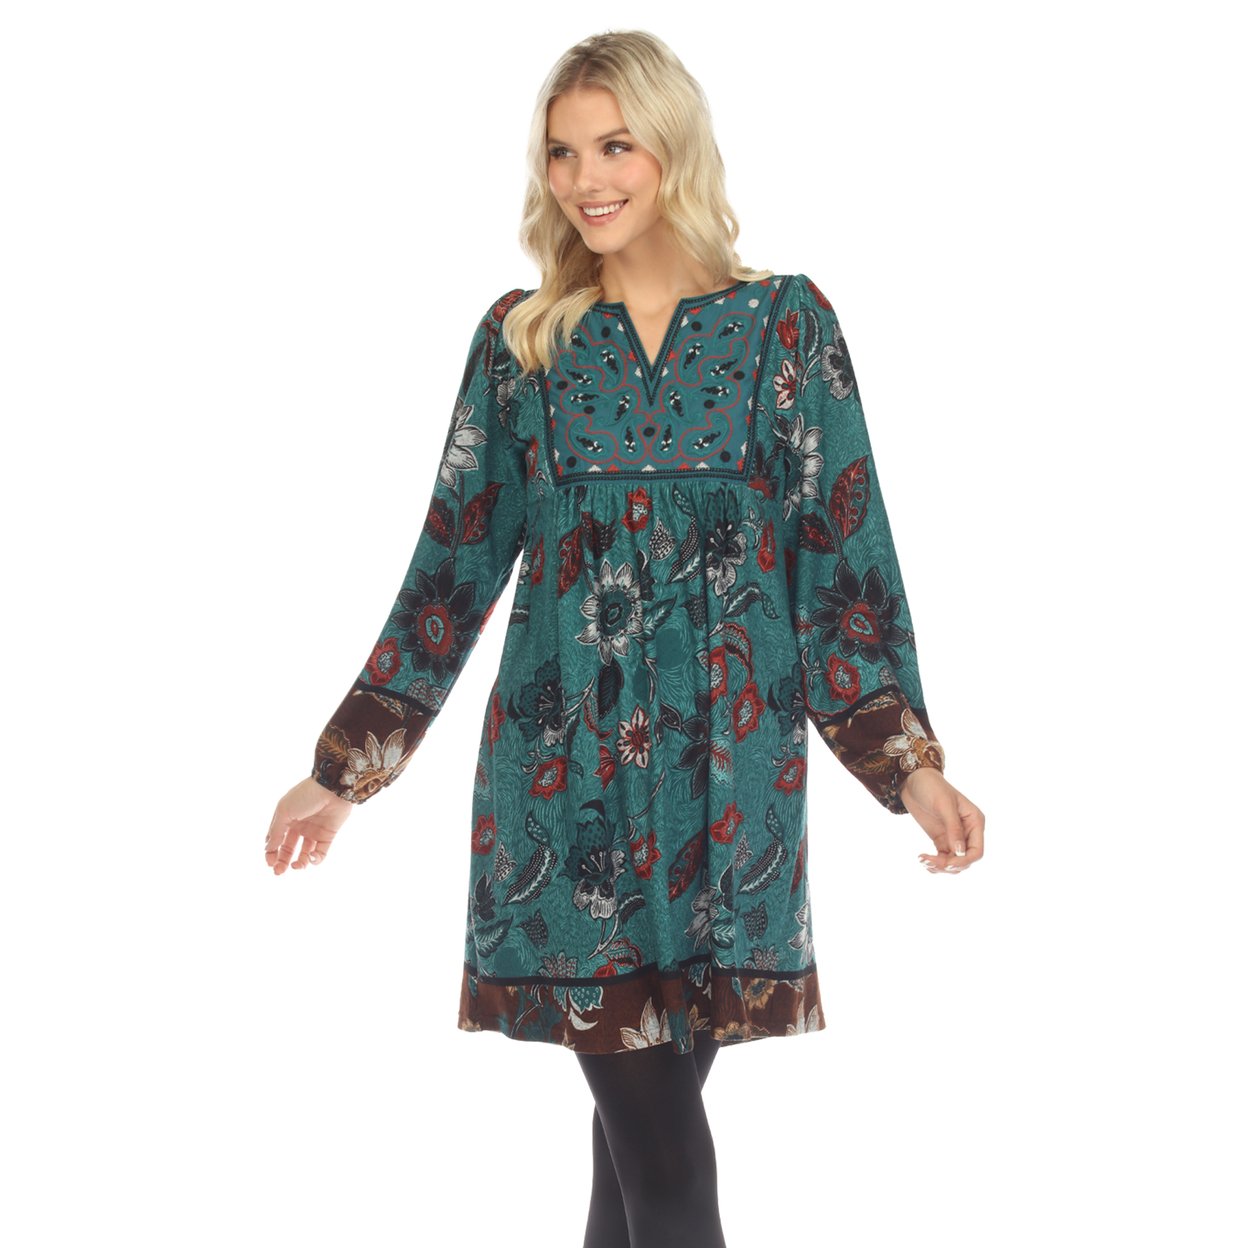 White Mark Women's Floral Paisley Sweater Dress - Teal, X-large